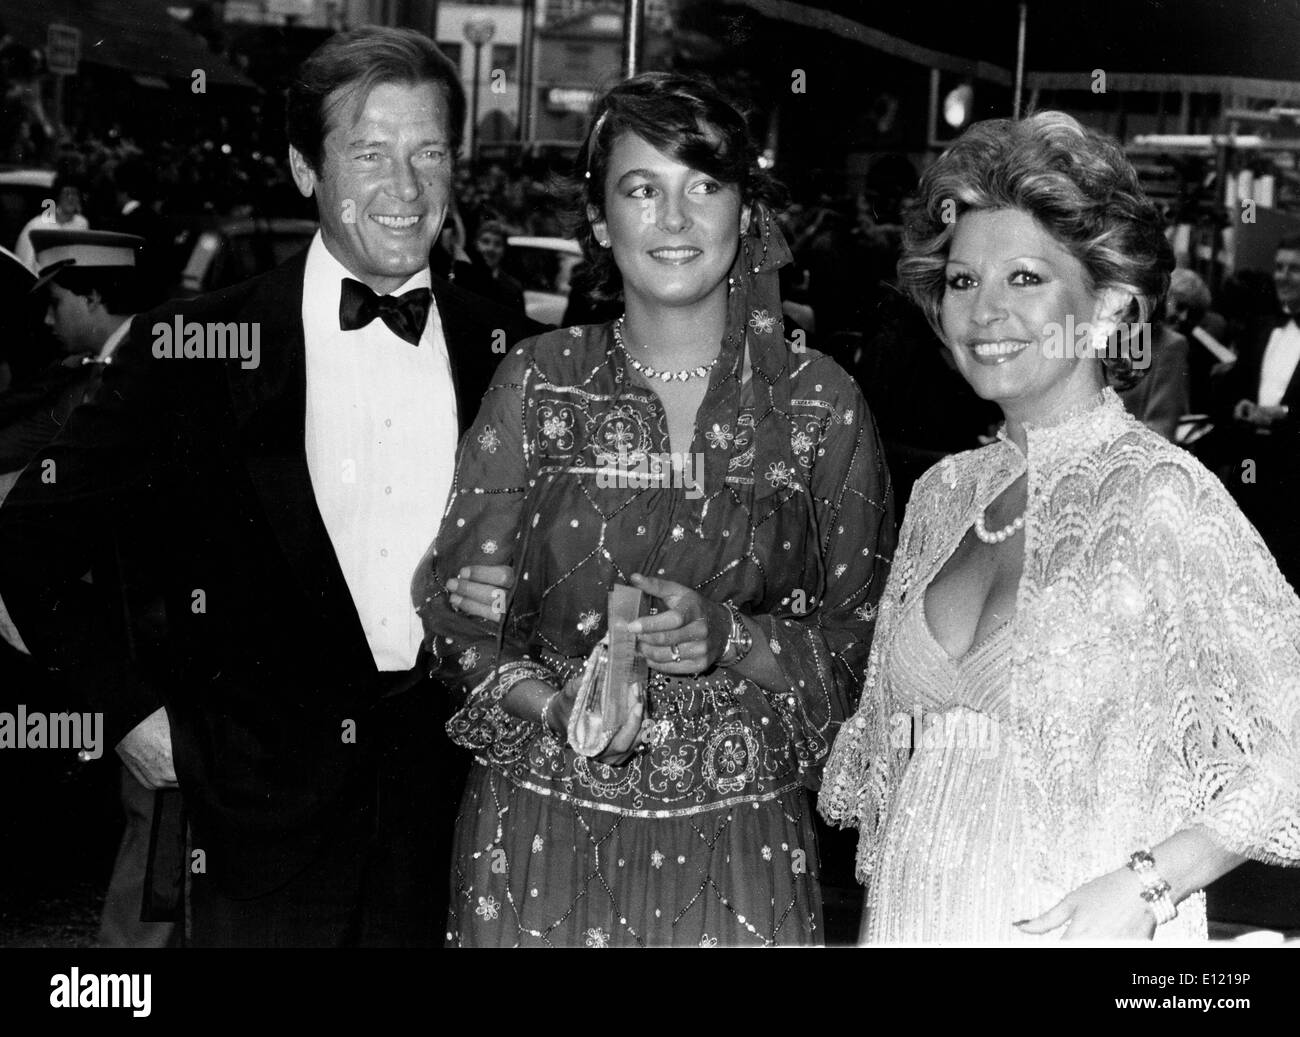 Actor Roger Moore at film premiere with family Stock Photo